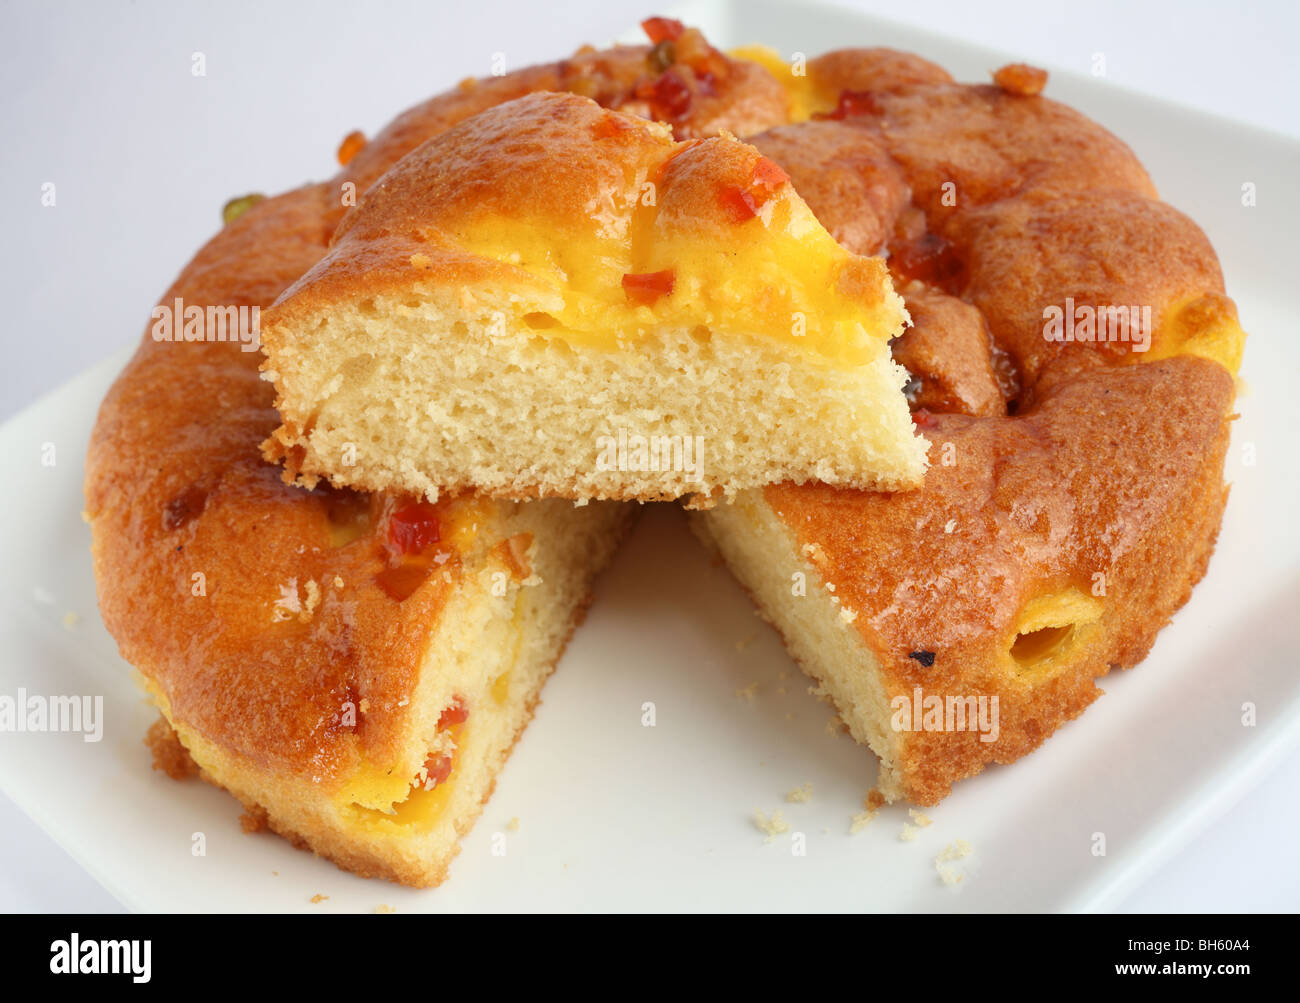 An italian style sponge cake with a wedge cut out and placed on top to show the texture Stock Photo